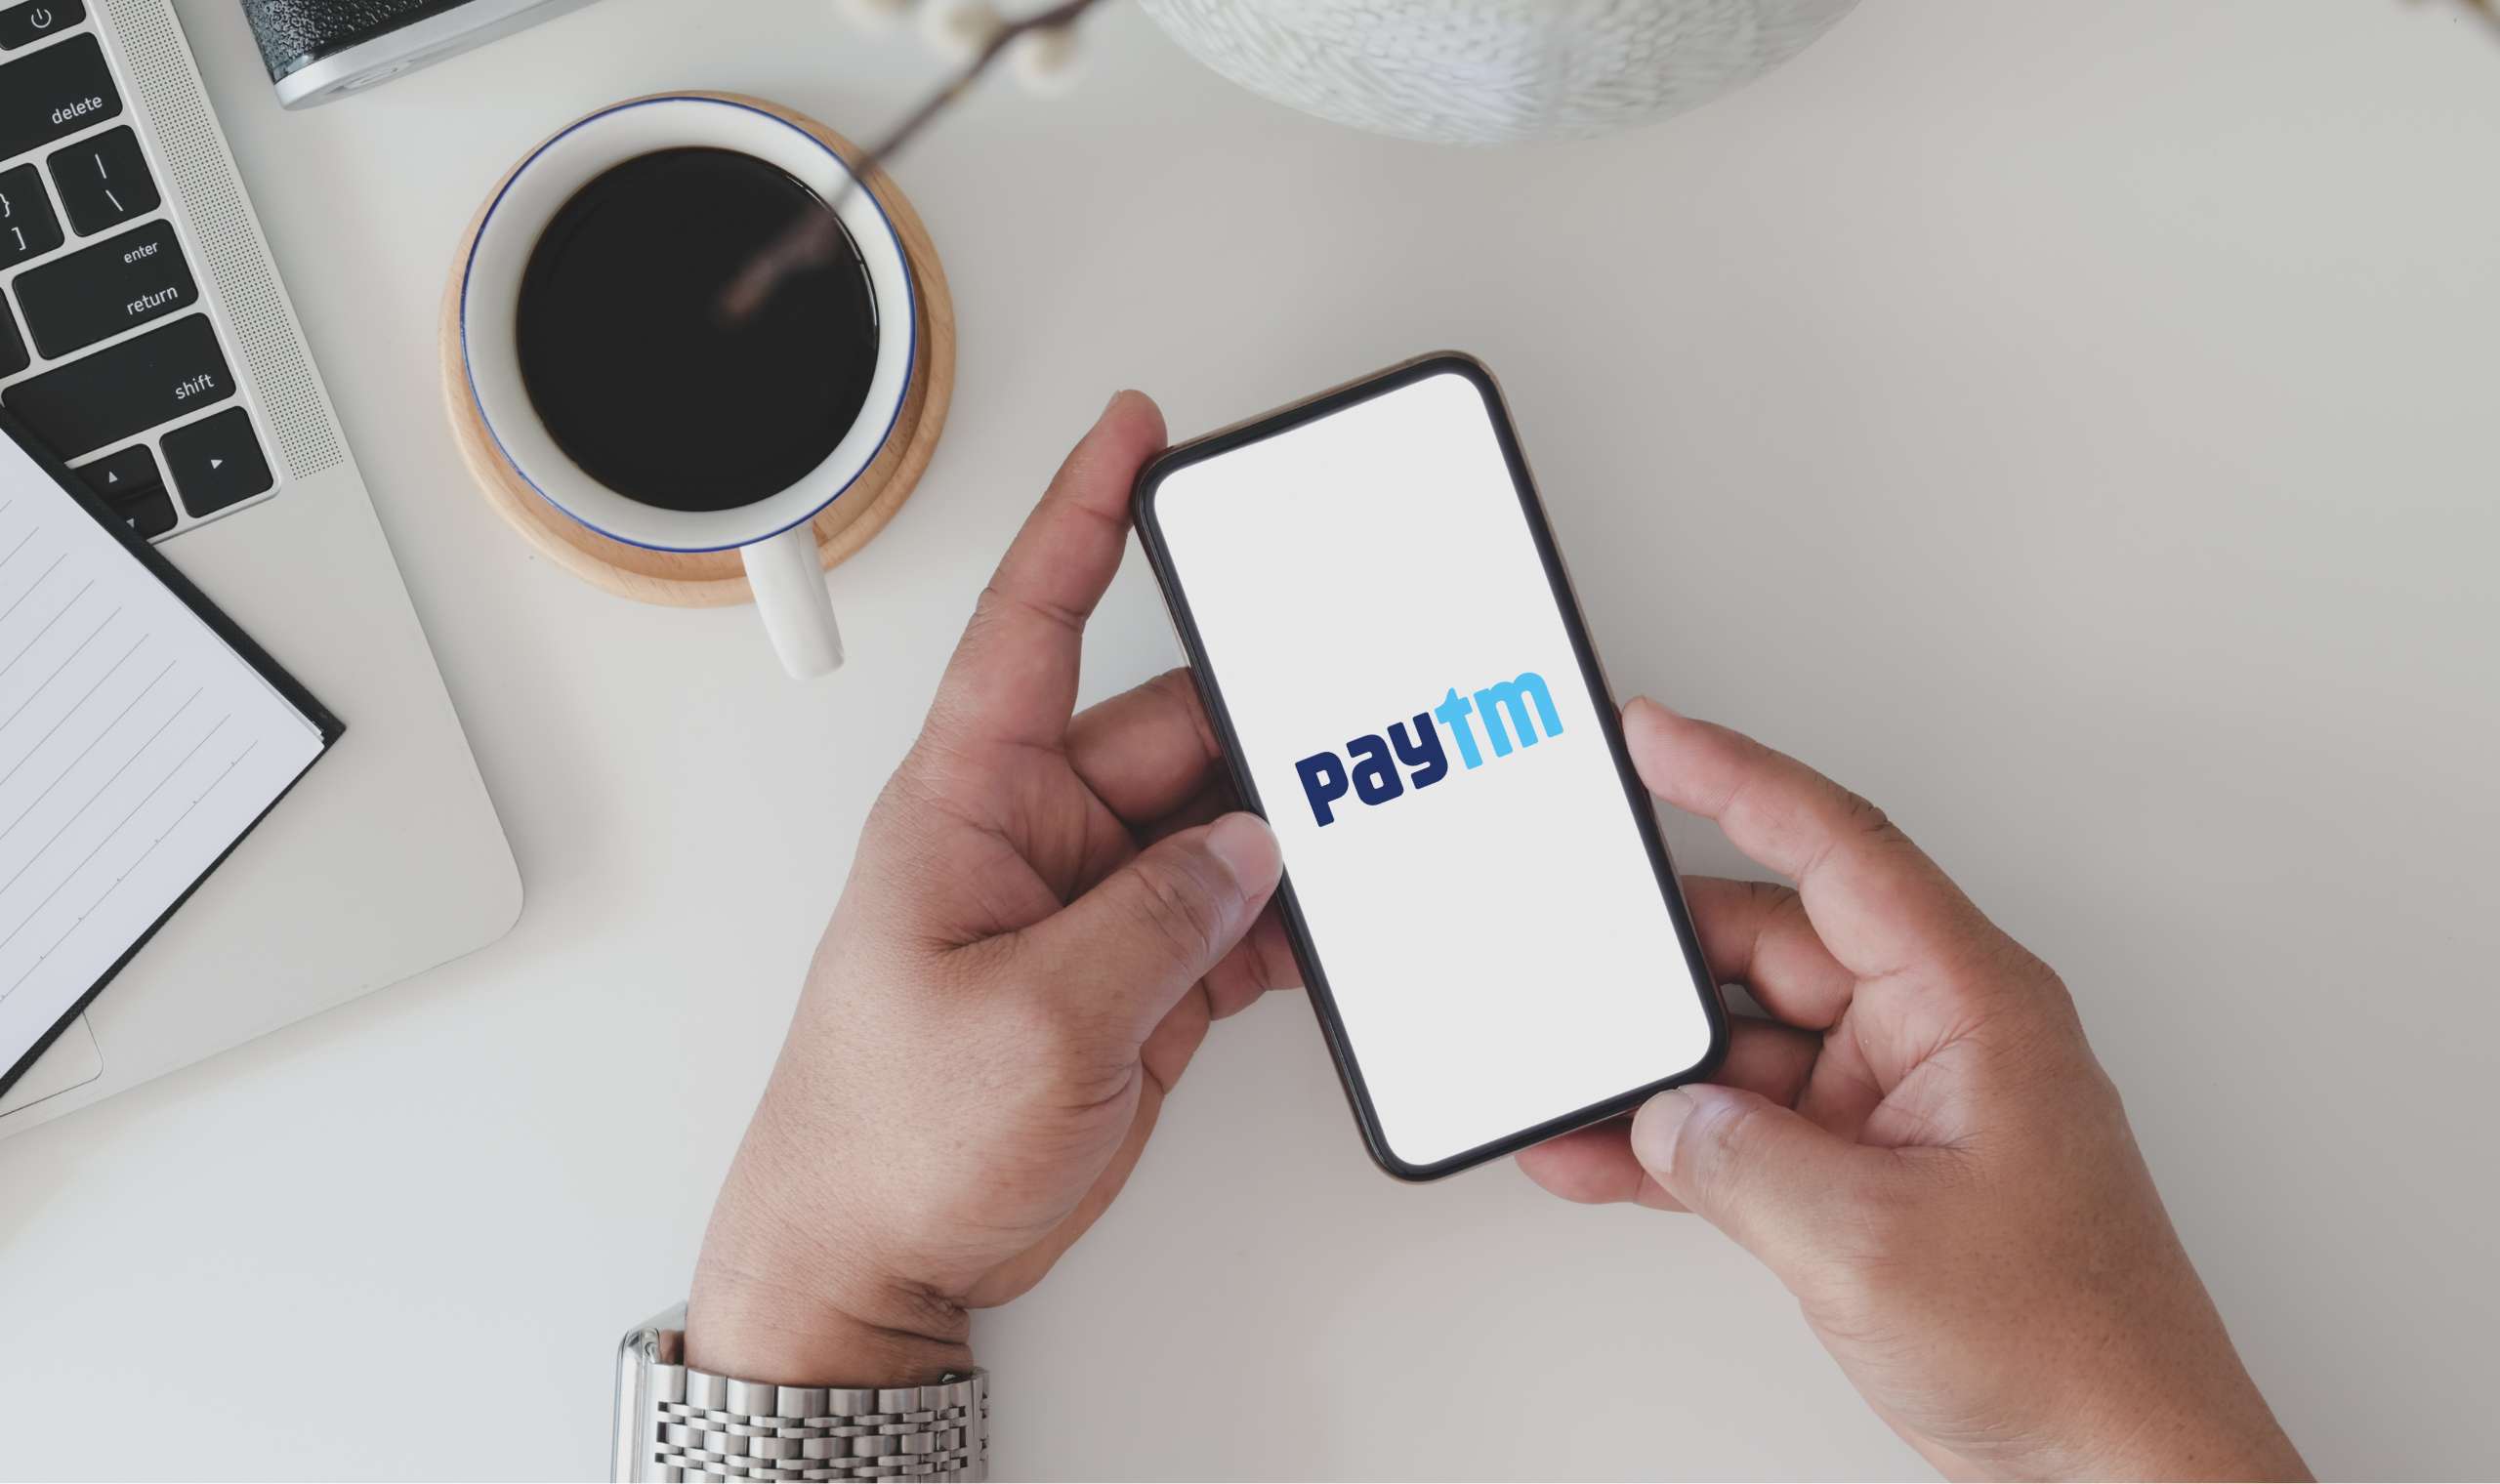 Paytm-Today-3%-Rise-with-New-Panel-for-Better-Compliance-&-Regulation-Stock-markets-update